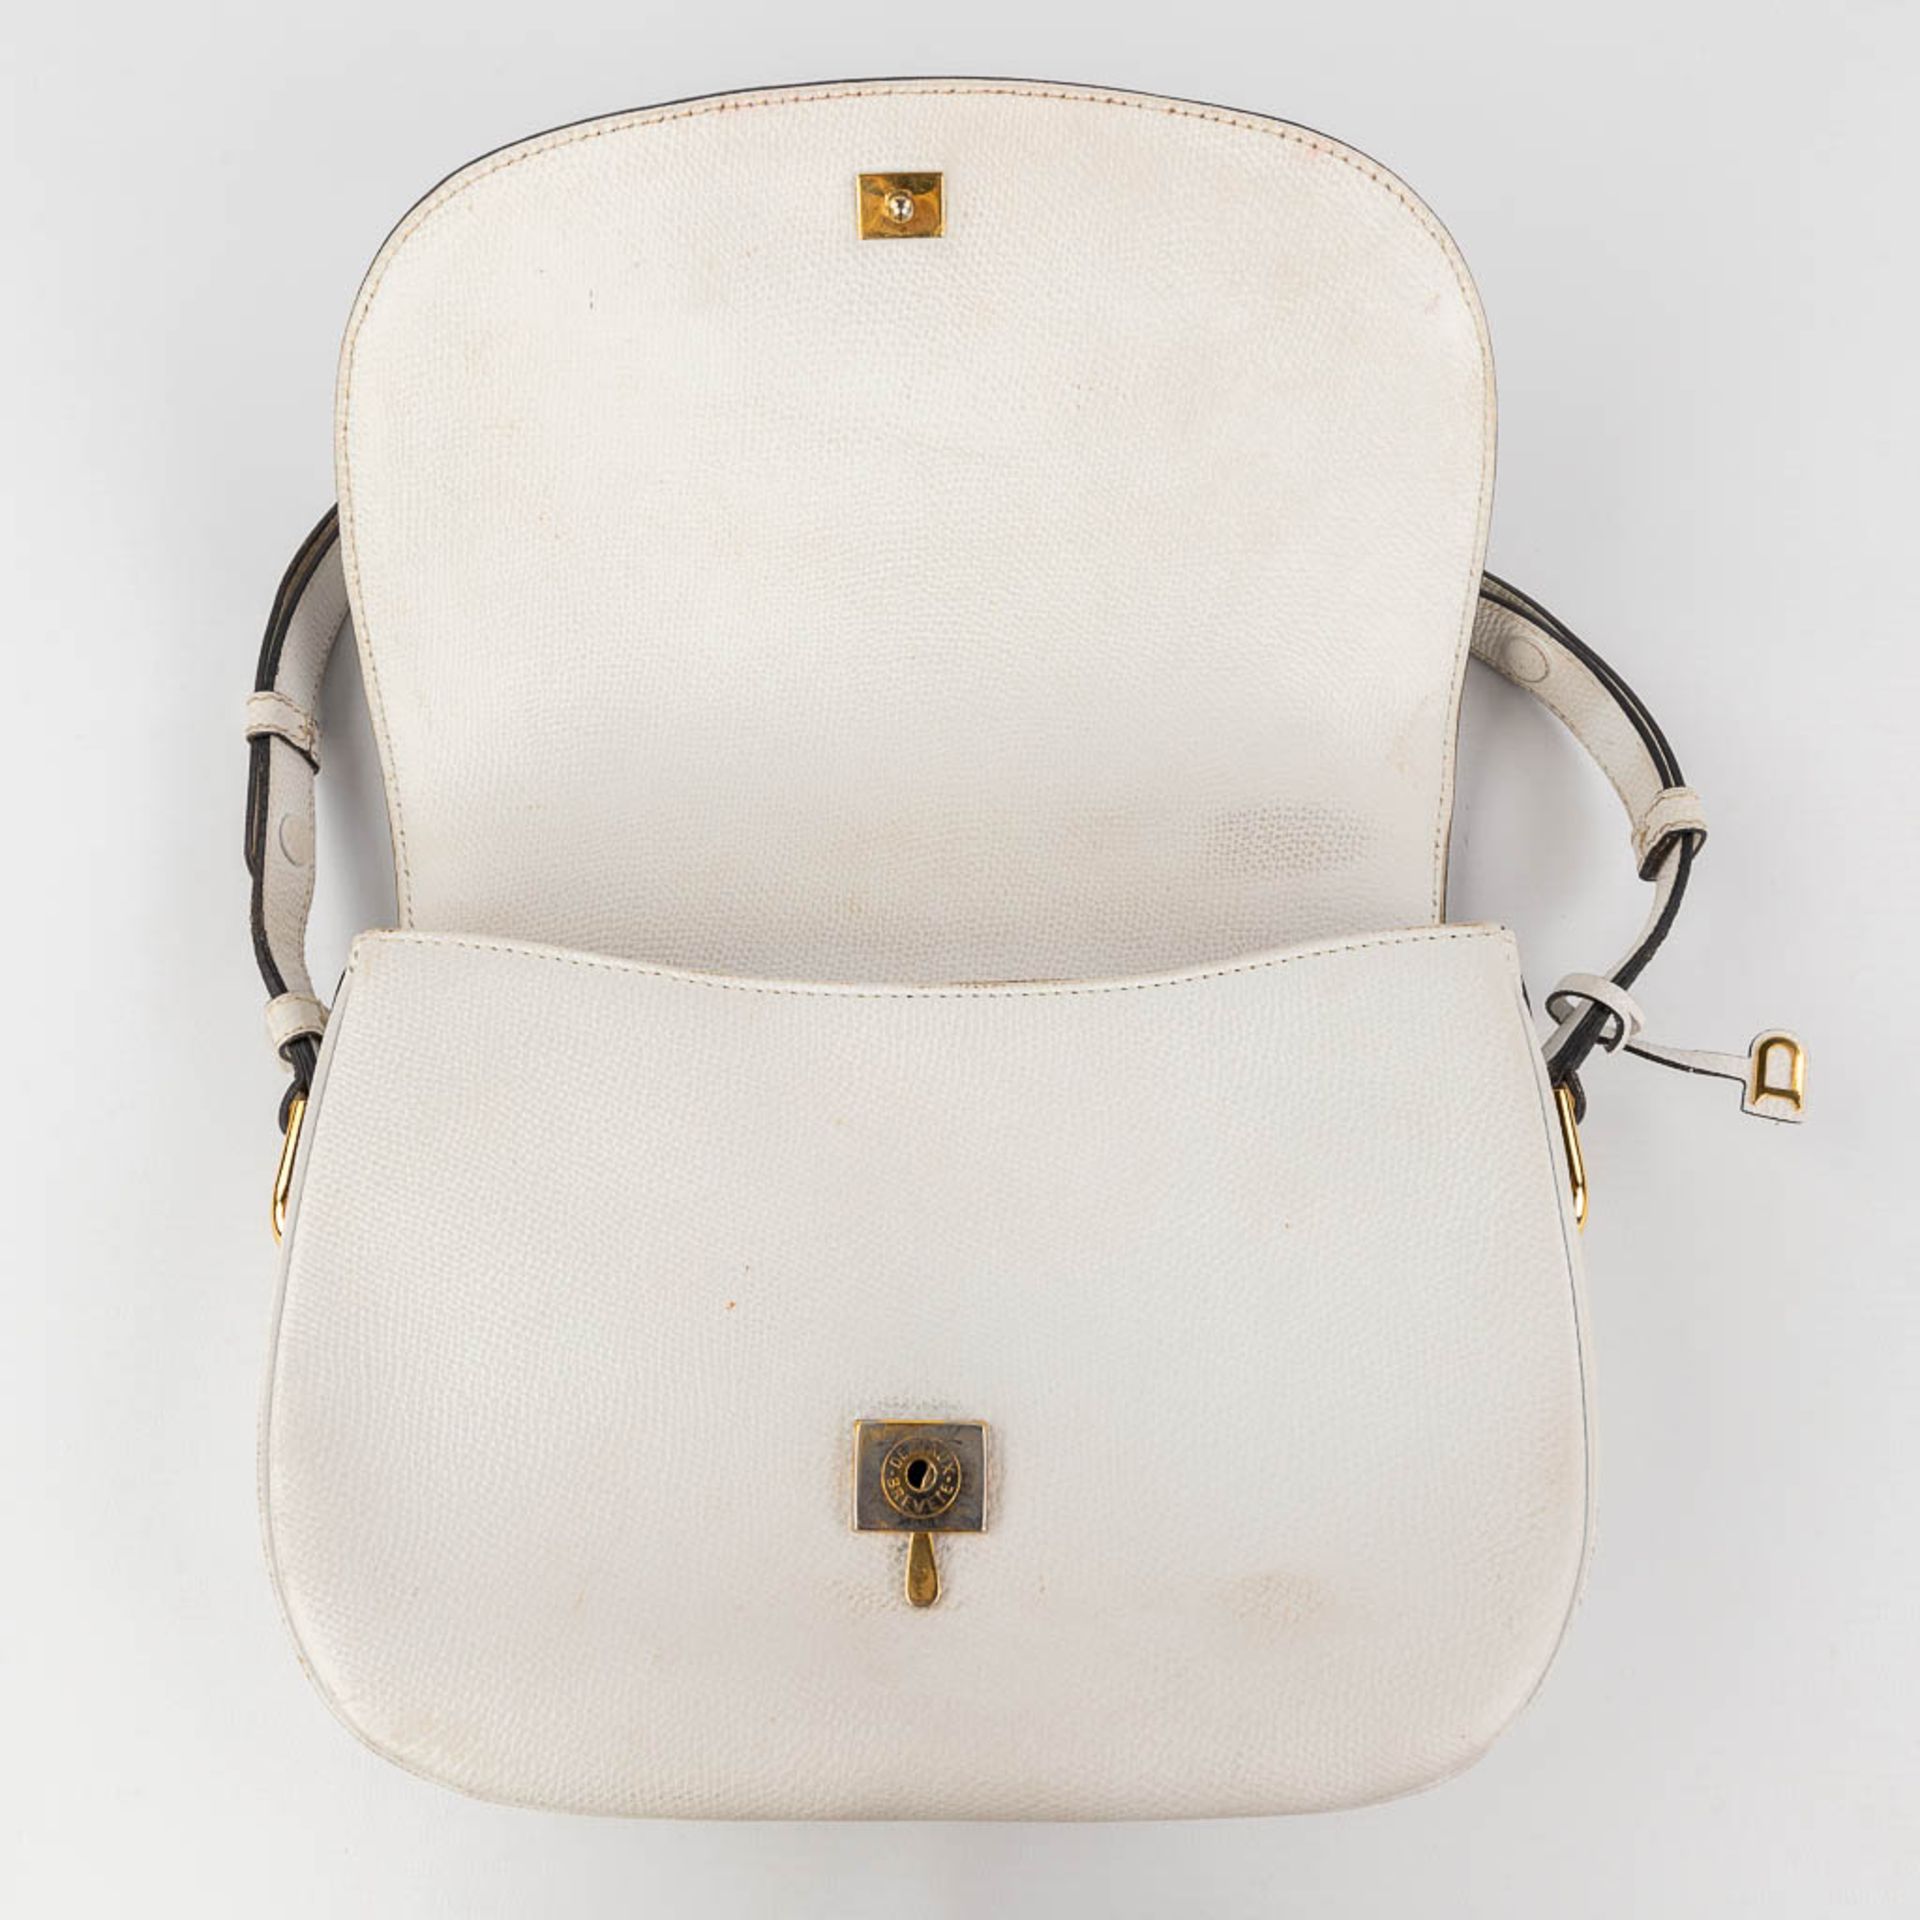 Delvaux, a handbag made of white leather with gold-plated elements. (W: 26 x H: 19 cm) - Bild 17 aus 19